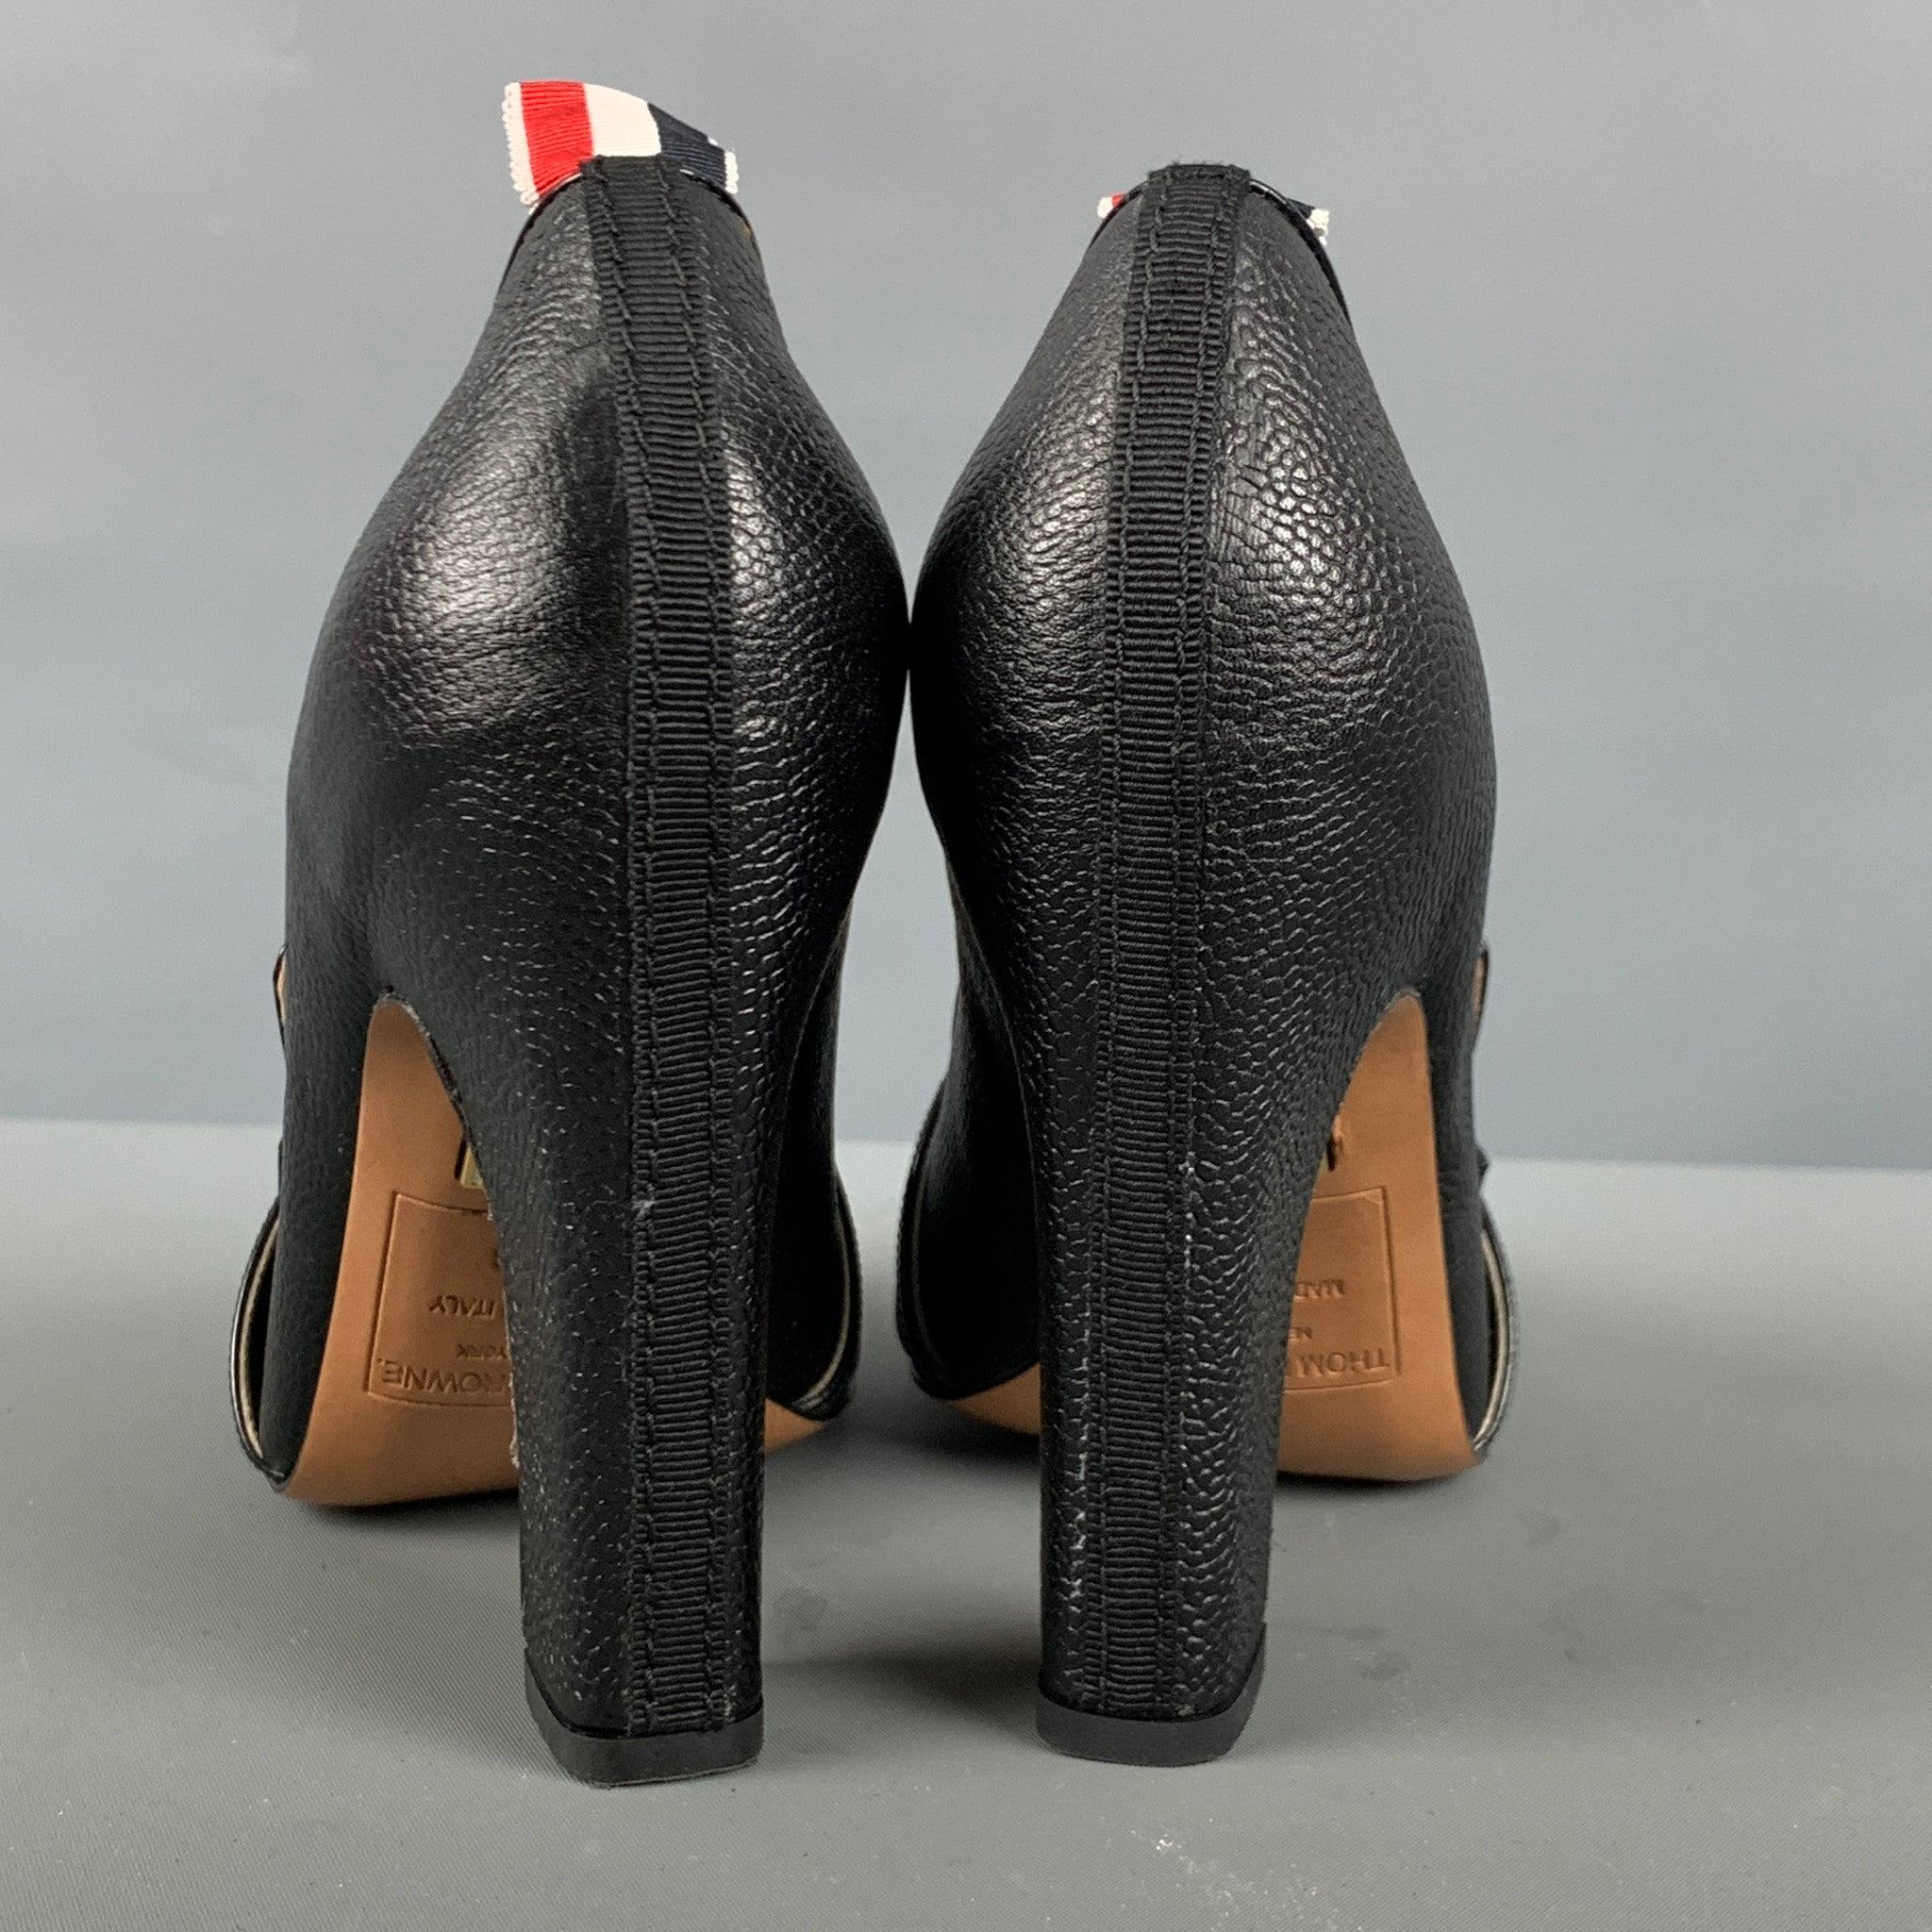 THOM BROWNE Size 8 Black Red & White Leather Mixed Materials Pebble Grain Pumps In Excellent Condition For Sale In San Francisco, CA